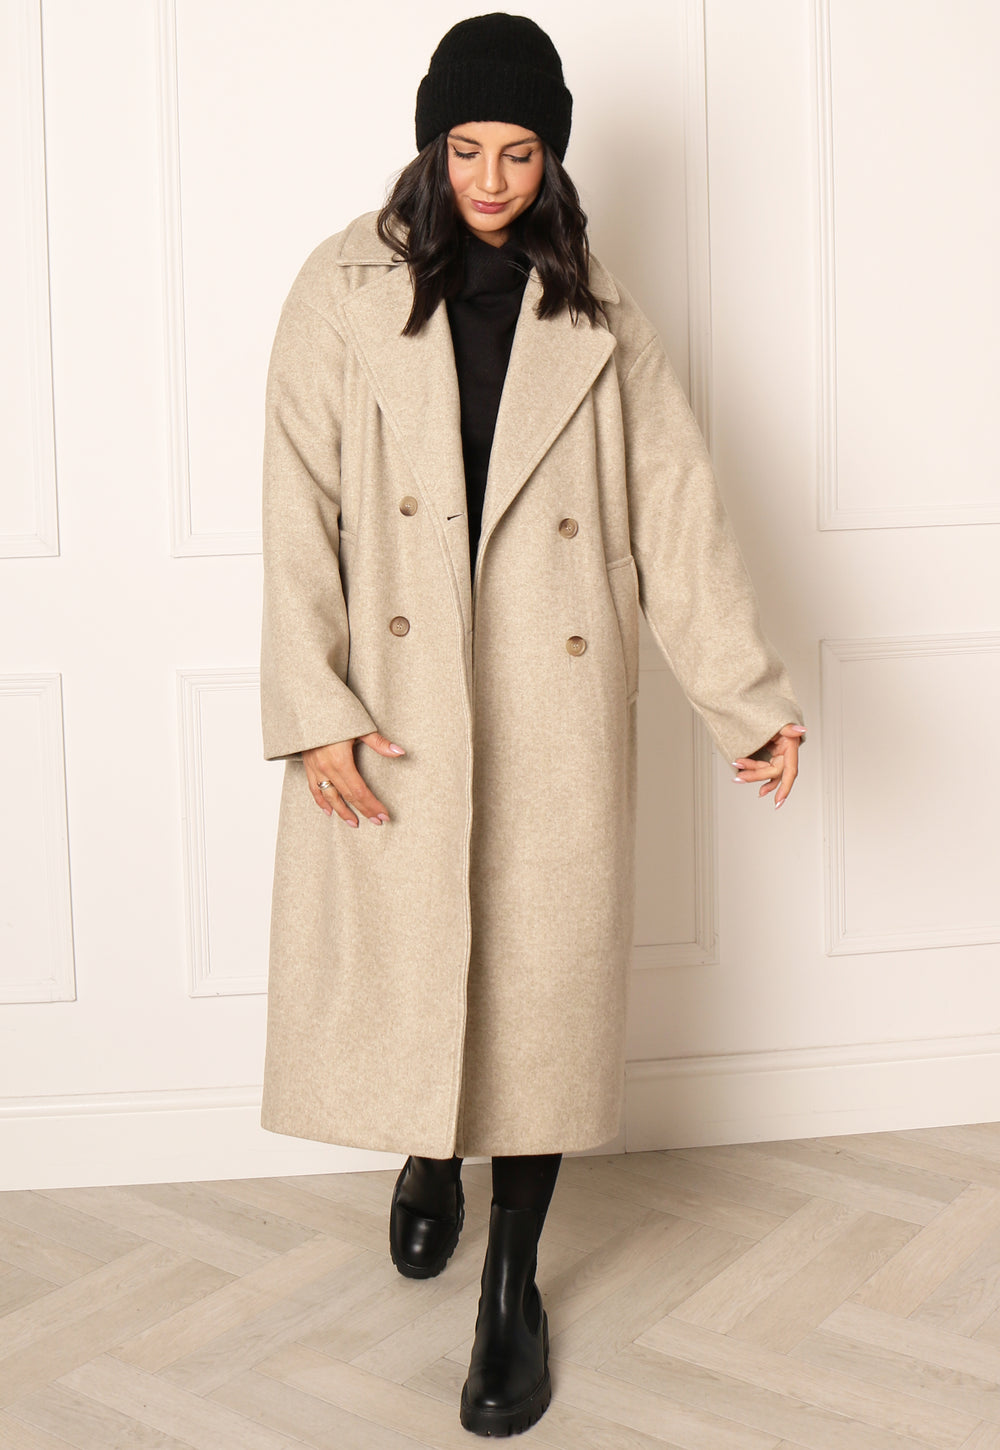 ONLY Wembley Oversized Double Breasted Longline Wool Style Trench Coat in Beige Melange - One Nation Clothing